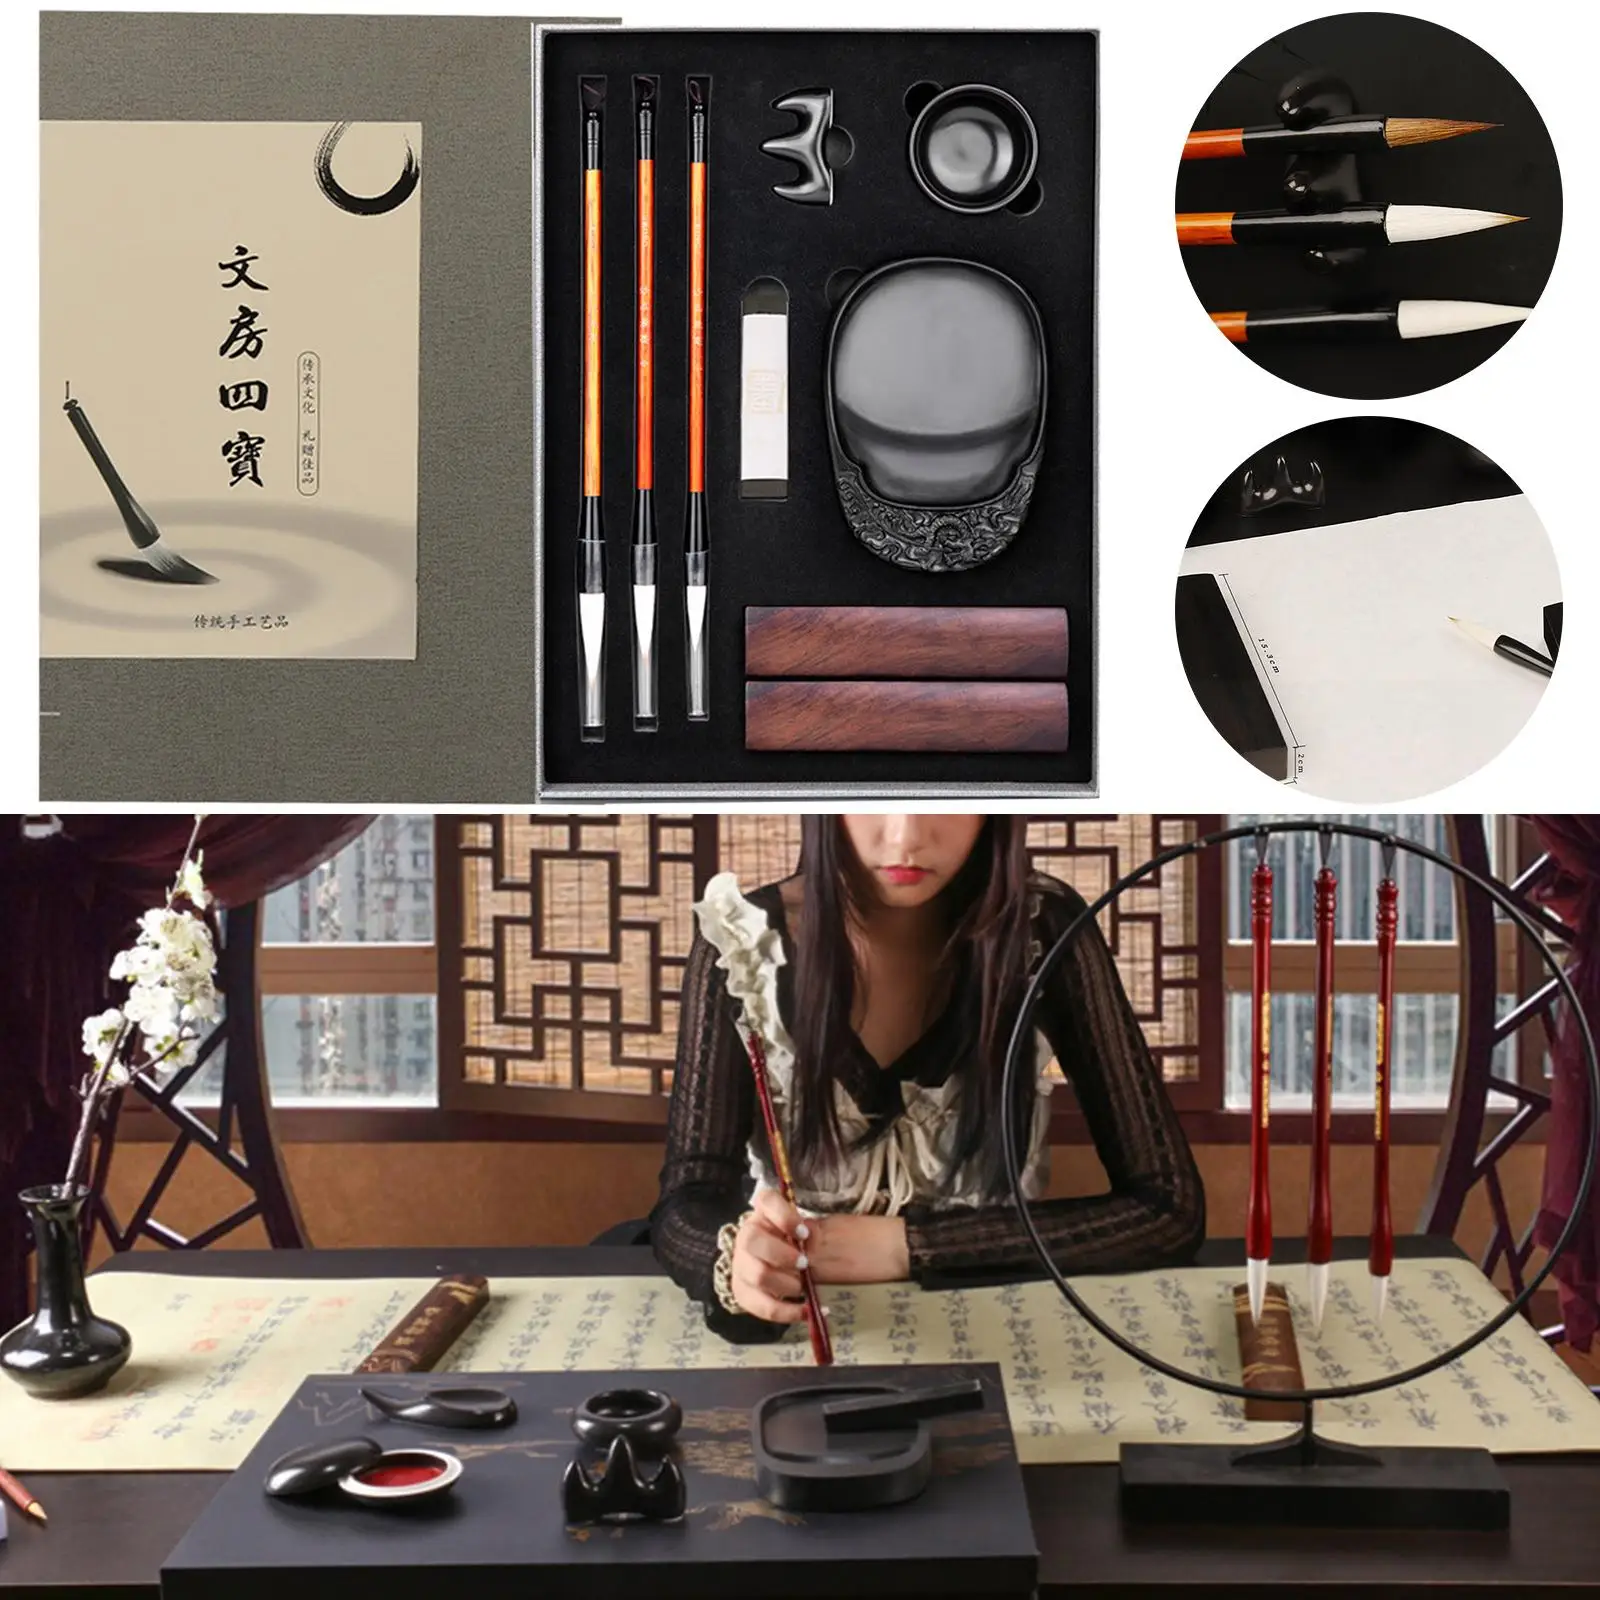 Chinese Traditional Calligraphy Set Writing Brush Professional for